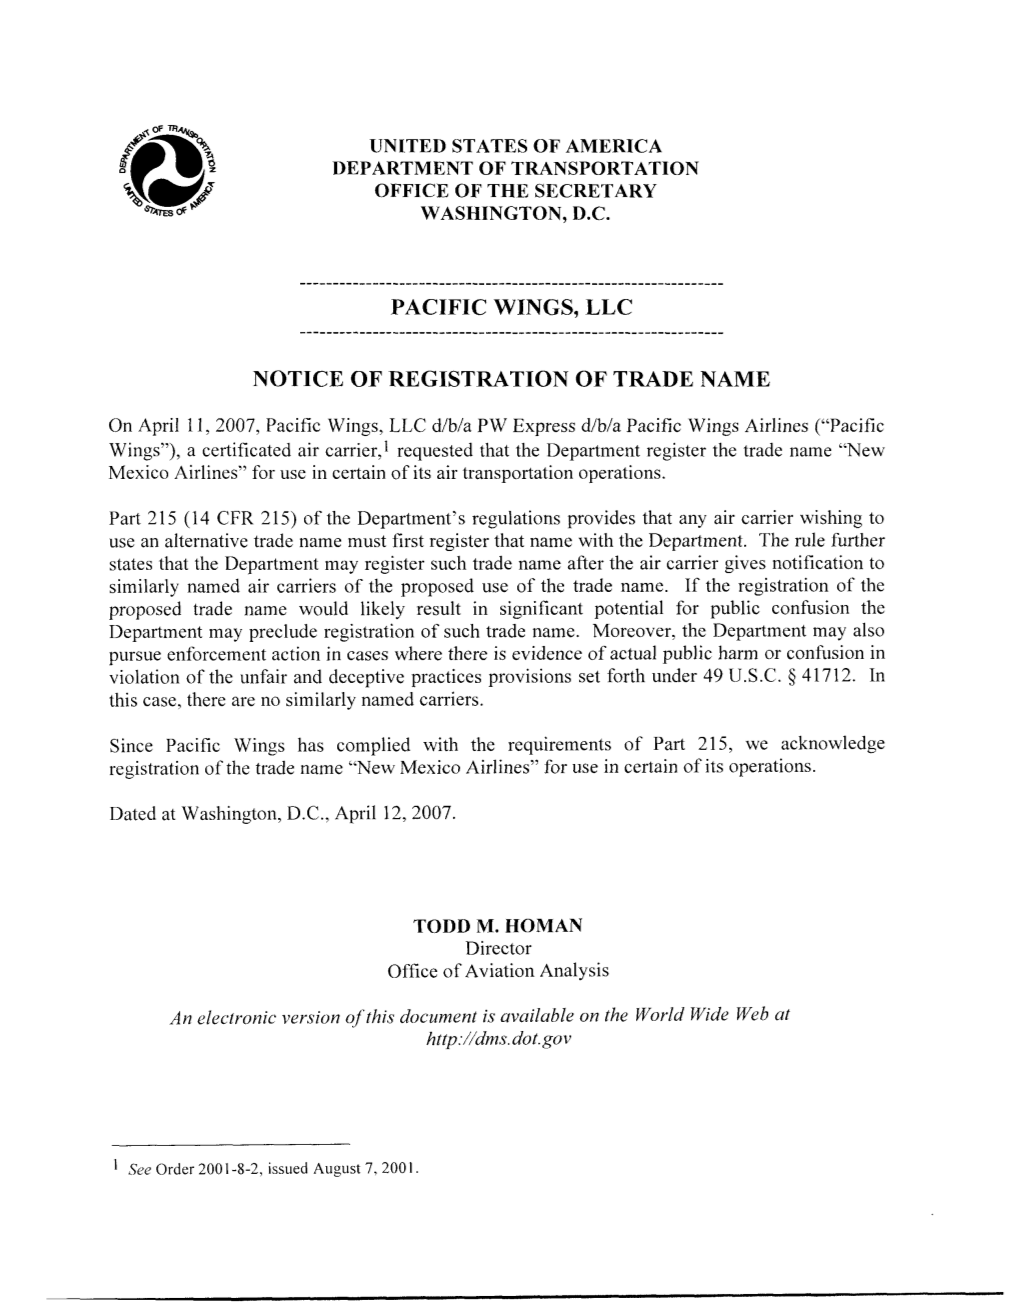 Pacific Wings, Llc Notice of Registration of Trade Name